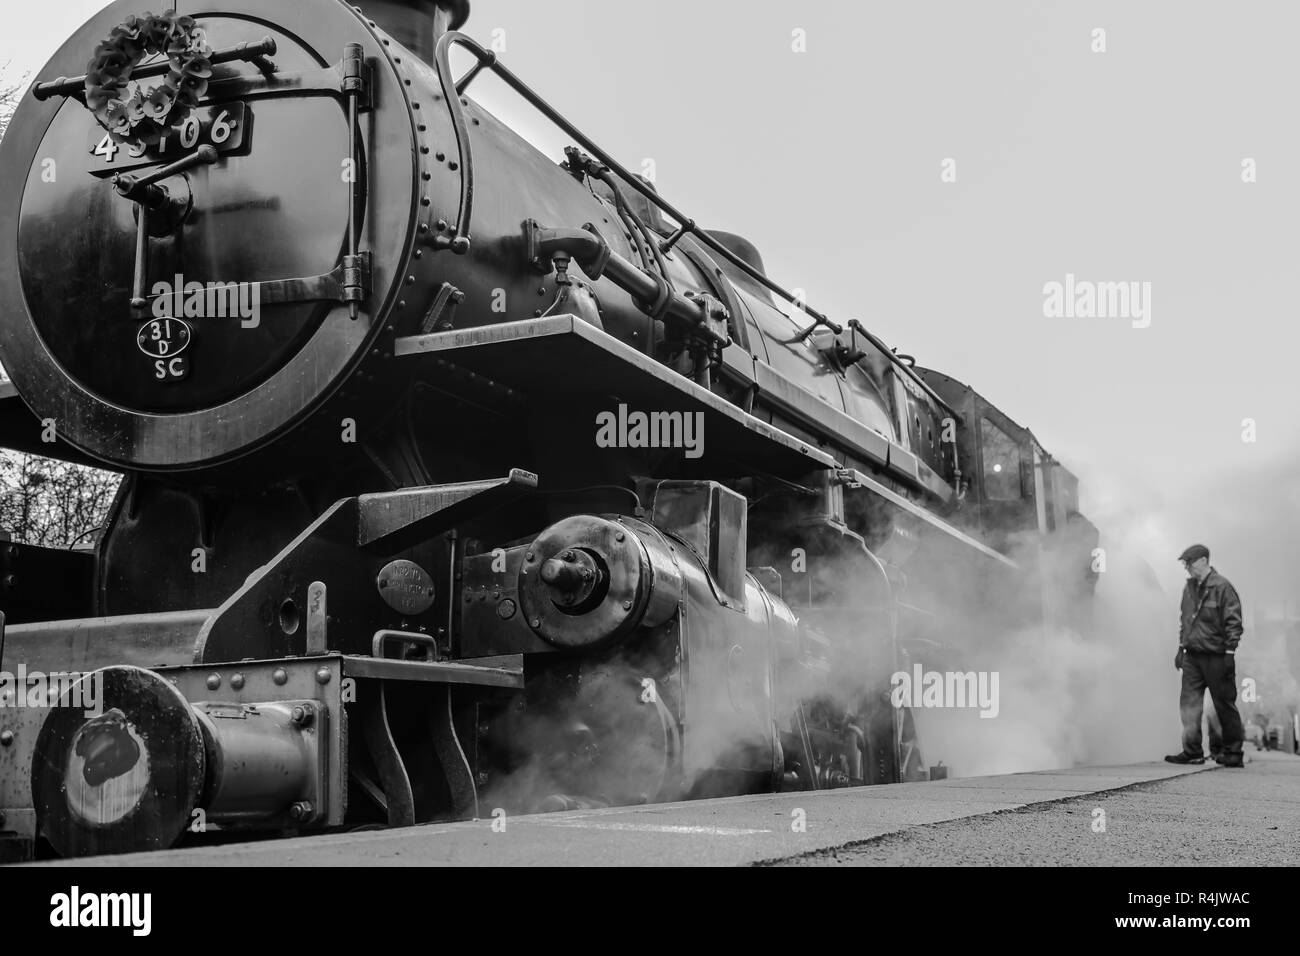 Mono, low angle, close up of vintage UK steam locomotive with trainspotter, rail enthusiast on platform, Severn Valley Heritage Railway. Stock Photo